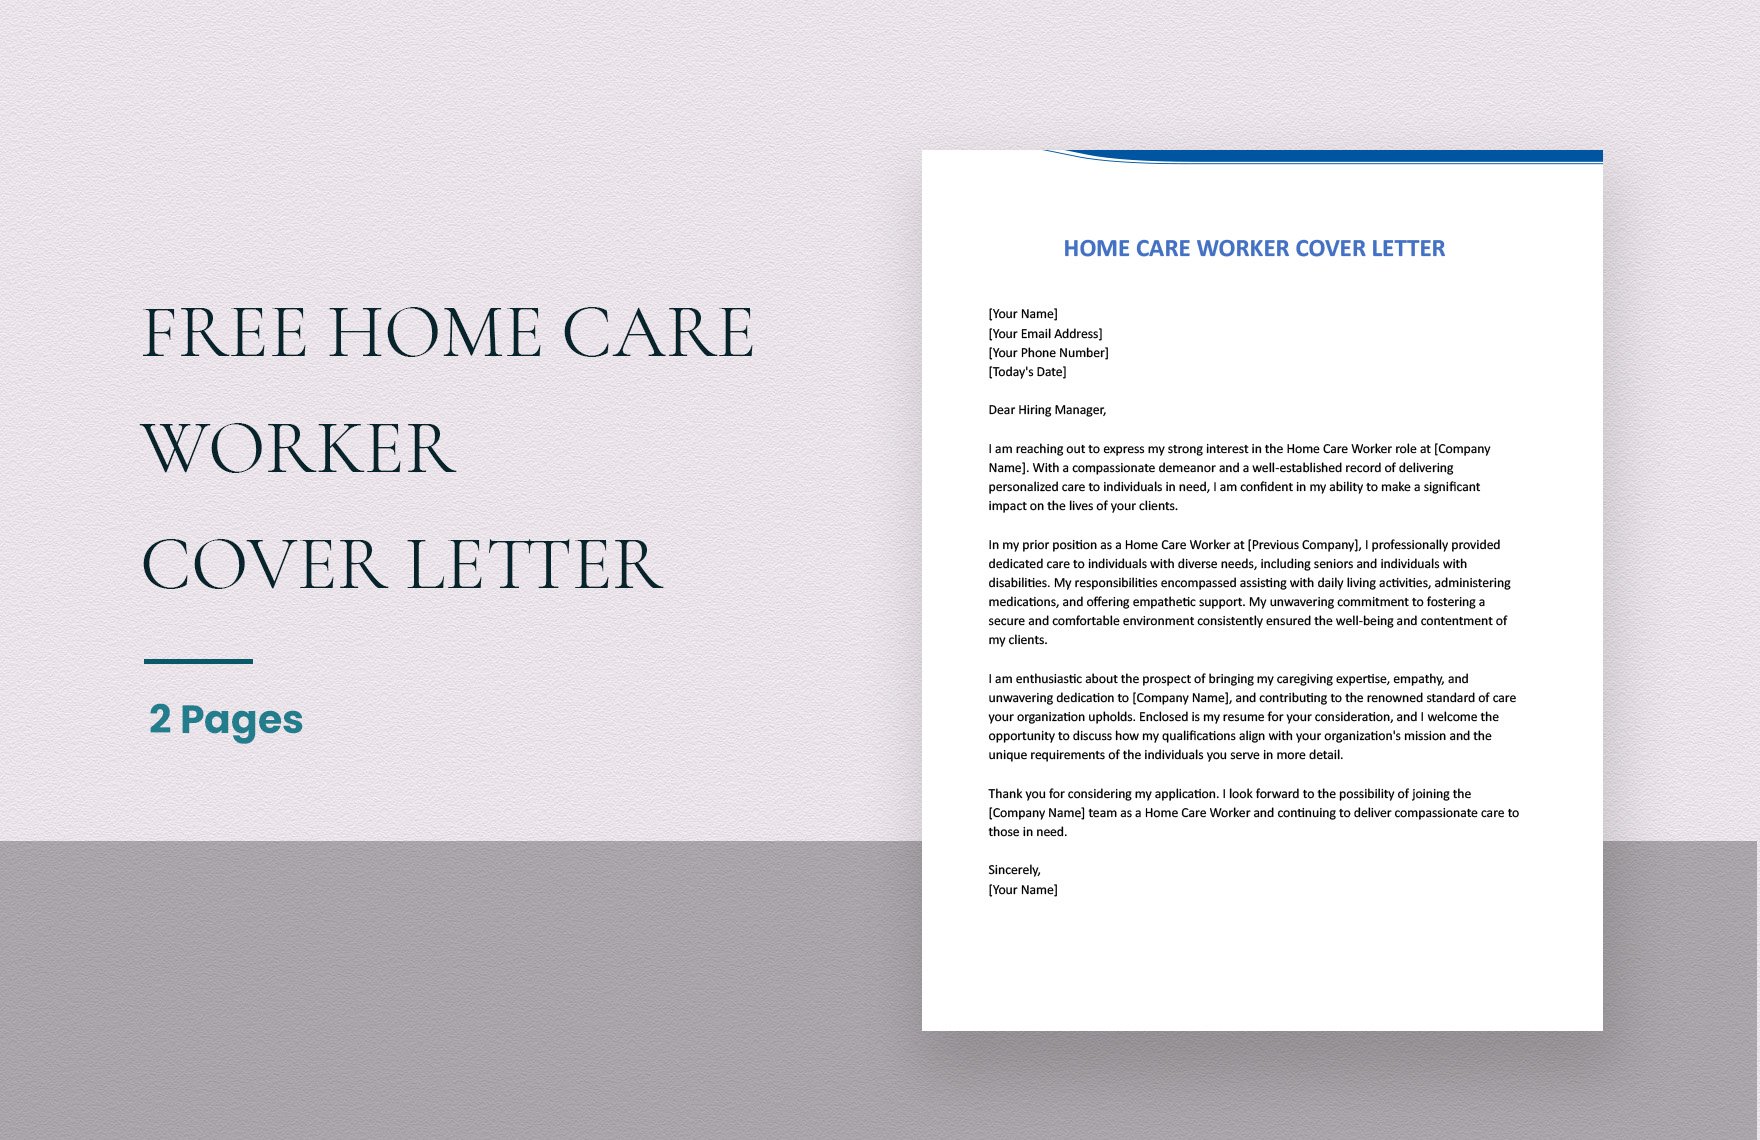 Home Care Worker Cover Letter